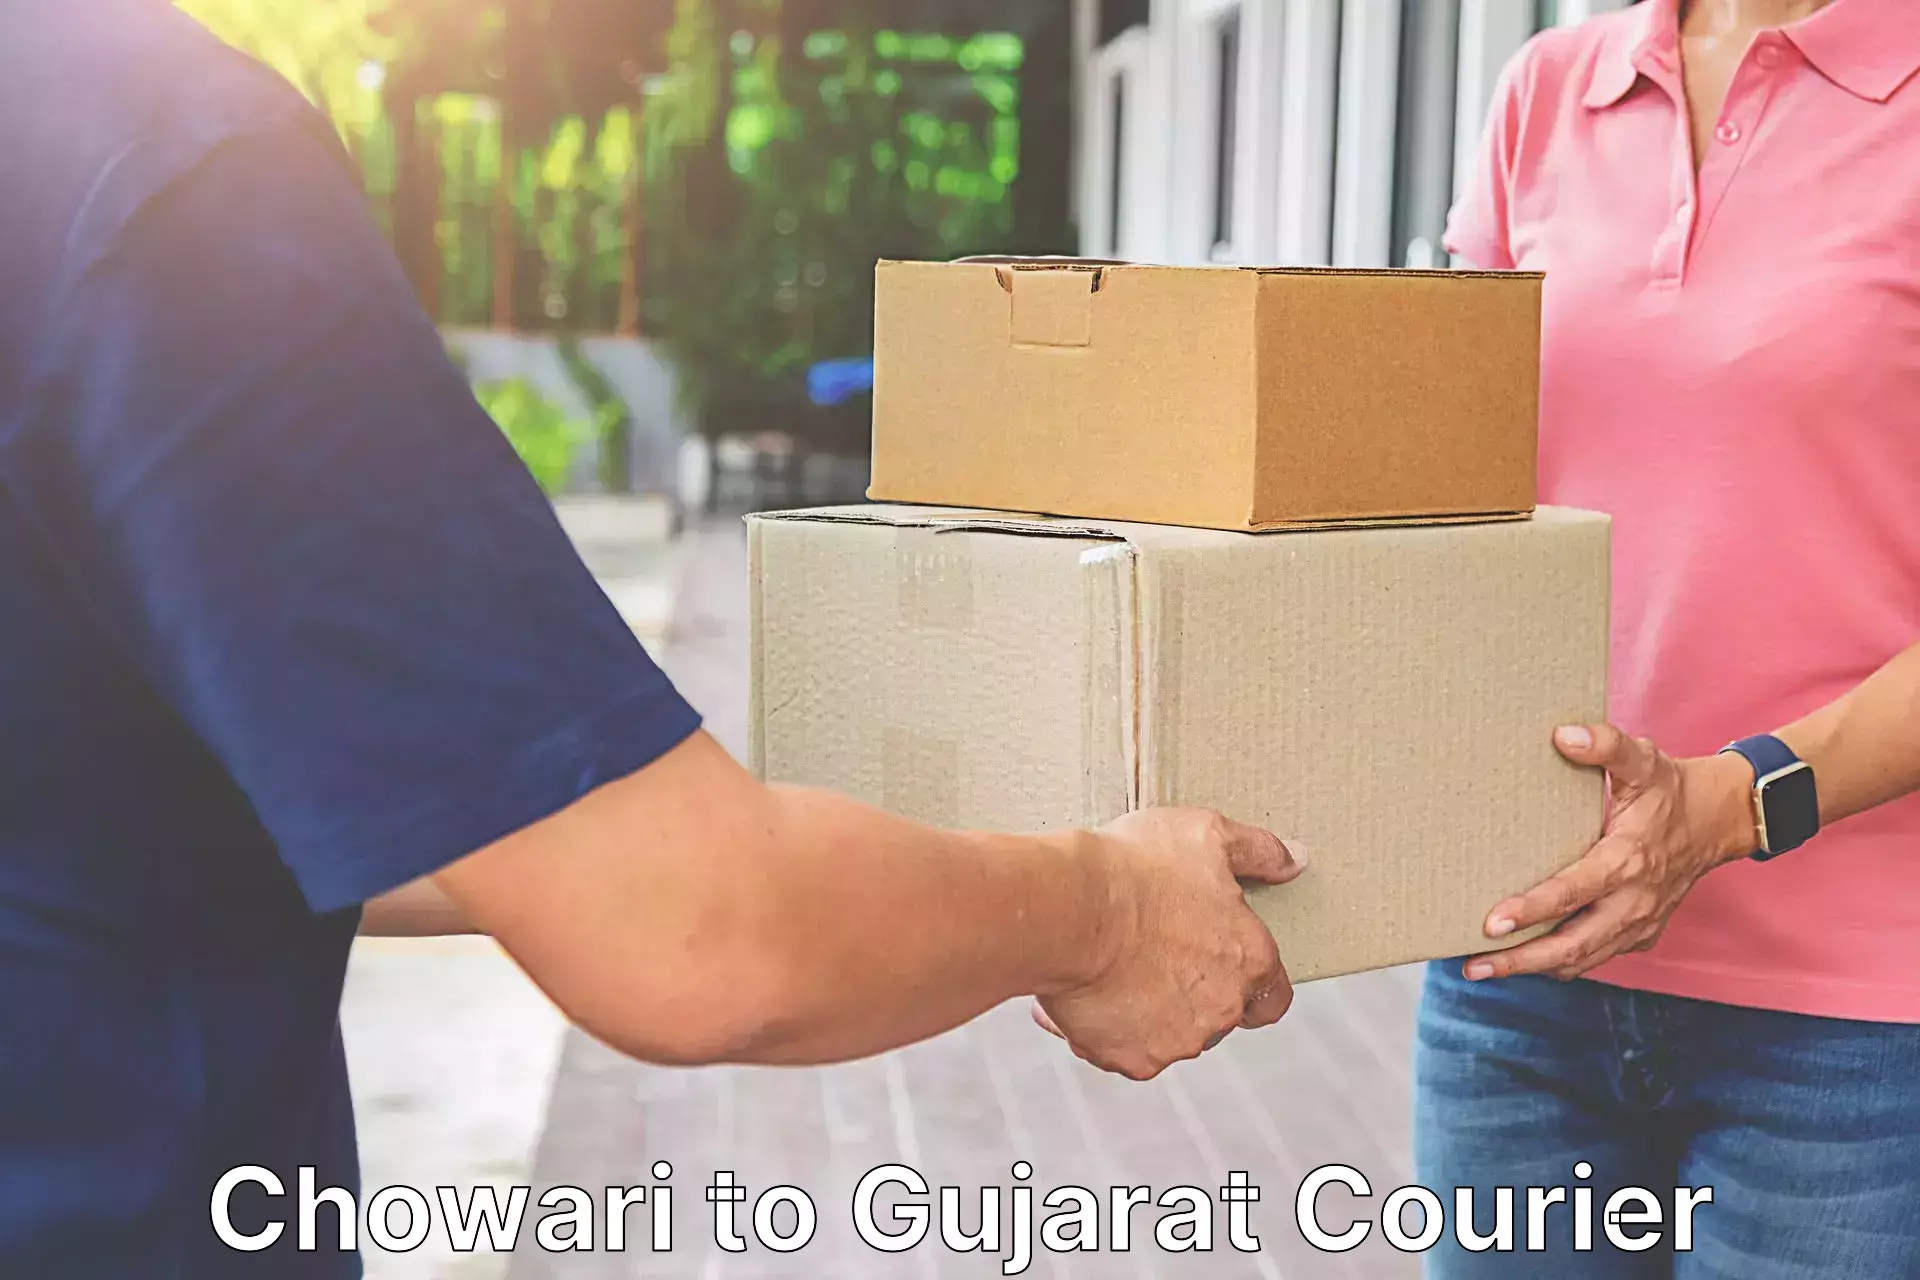 Next-day delivery options Chowari to Gujarat